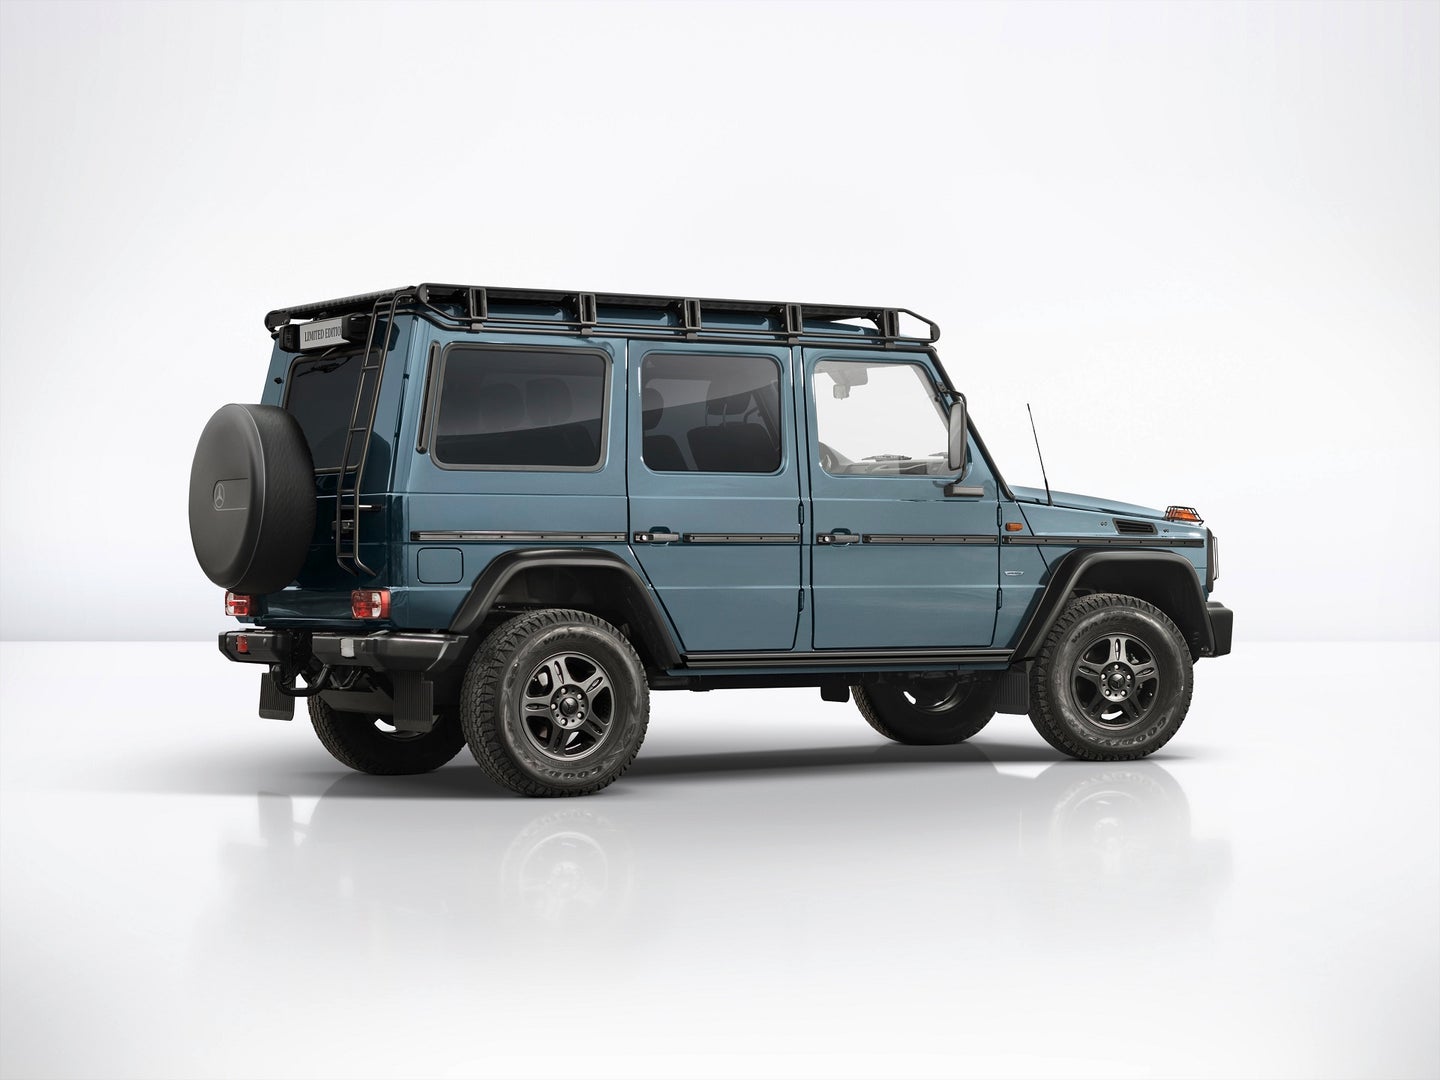 Three New Limited Edition G-Class’ with Alpine Aspirations